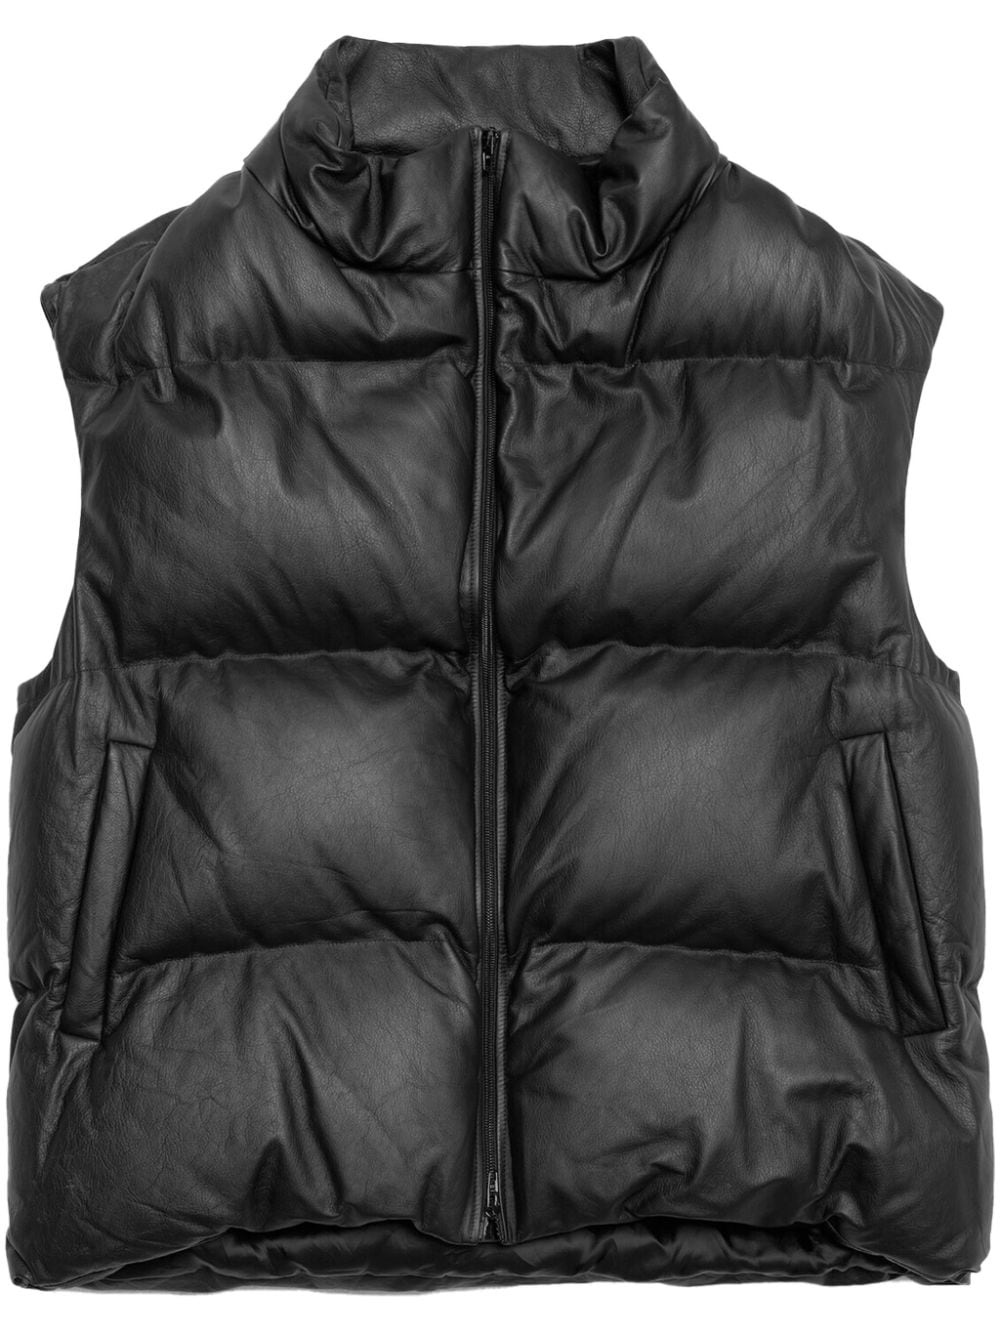 padded leather gilet - 1